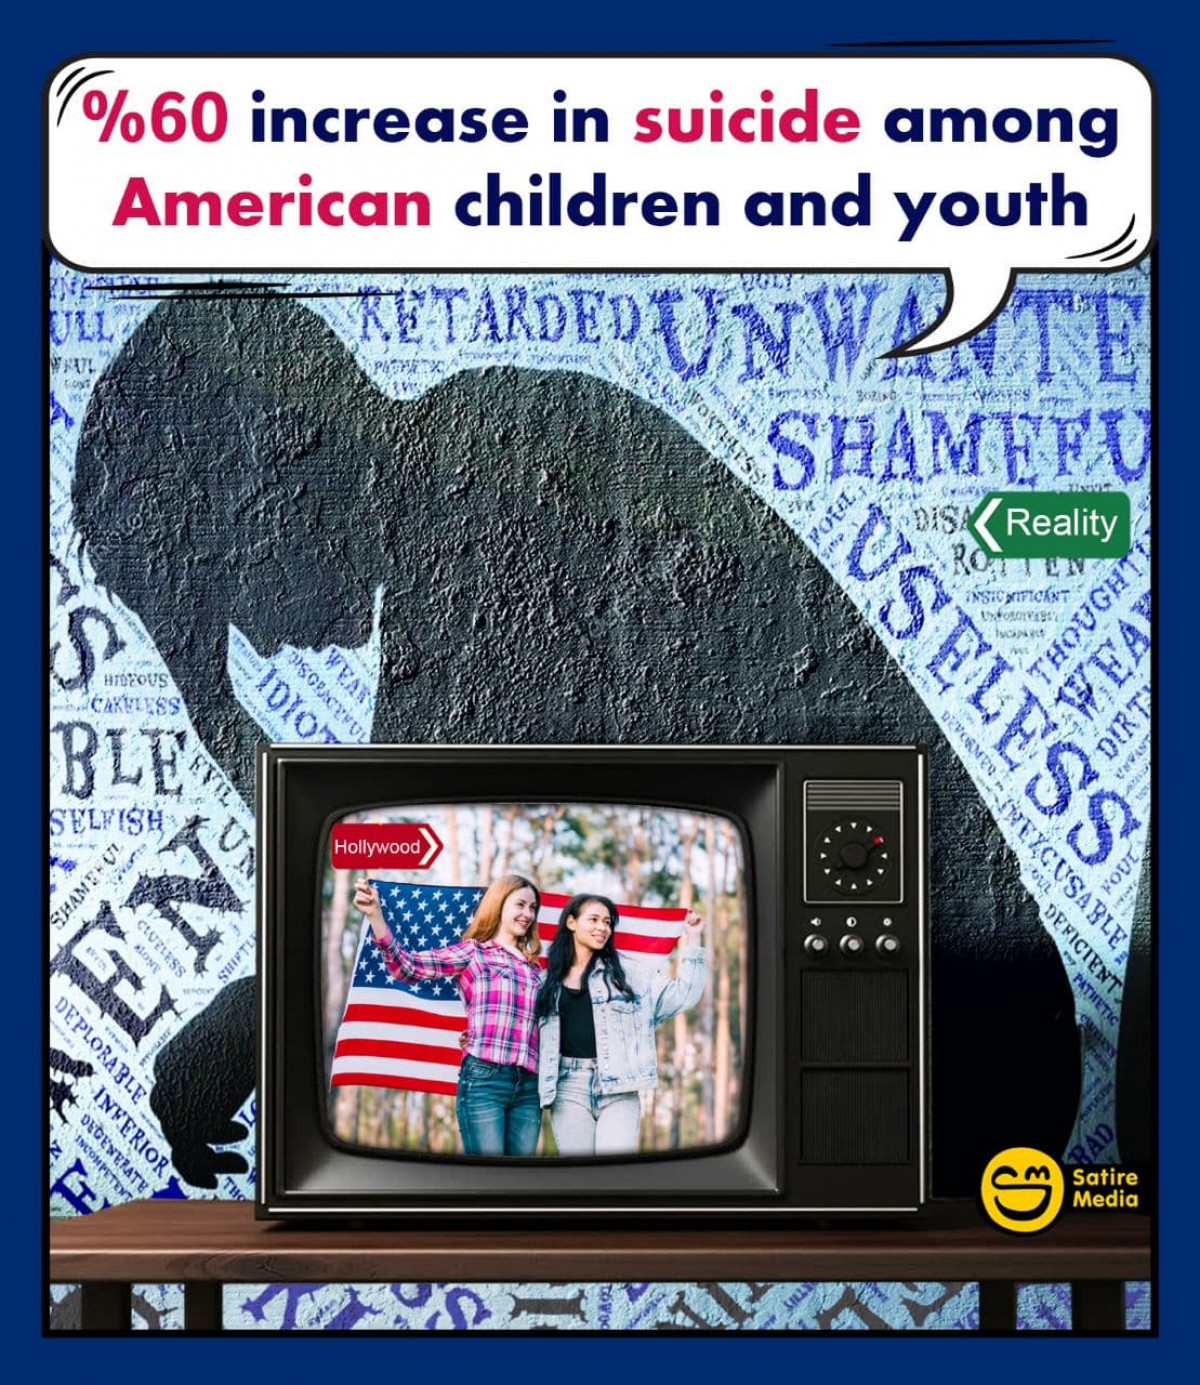 60% increase in suicide among American children and youth